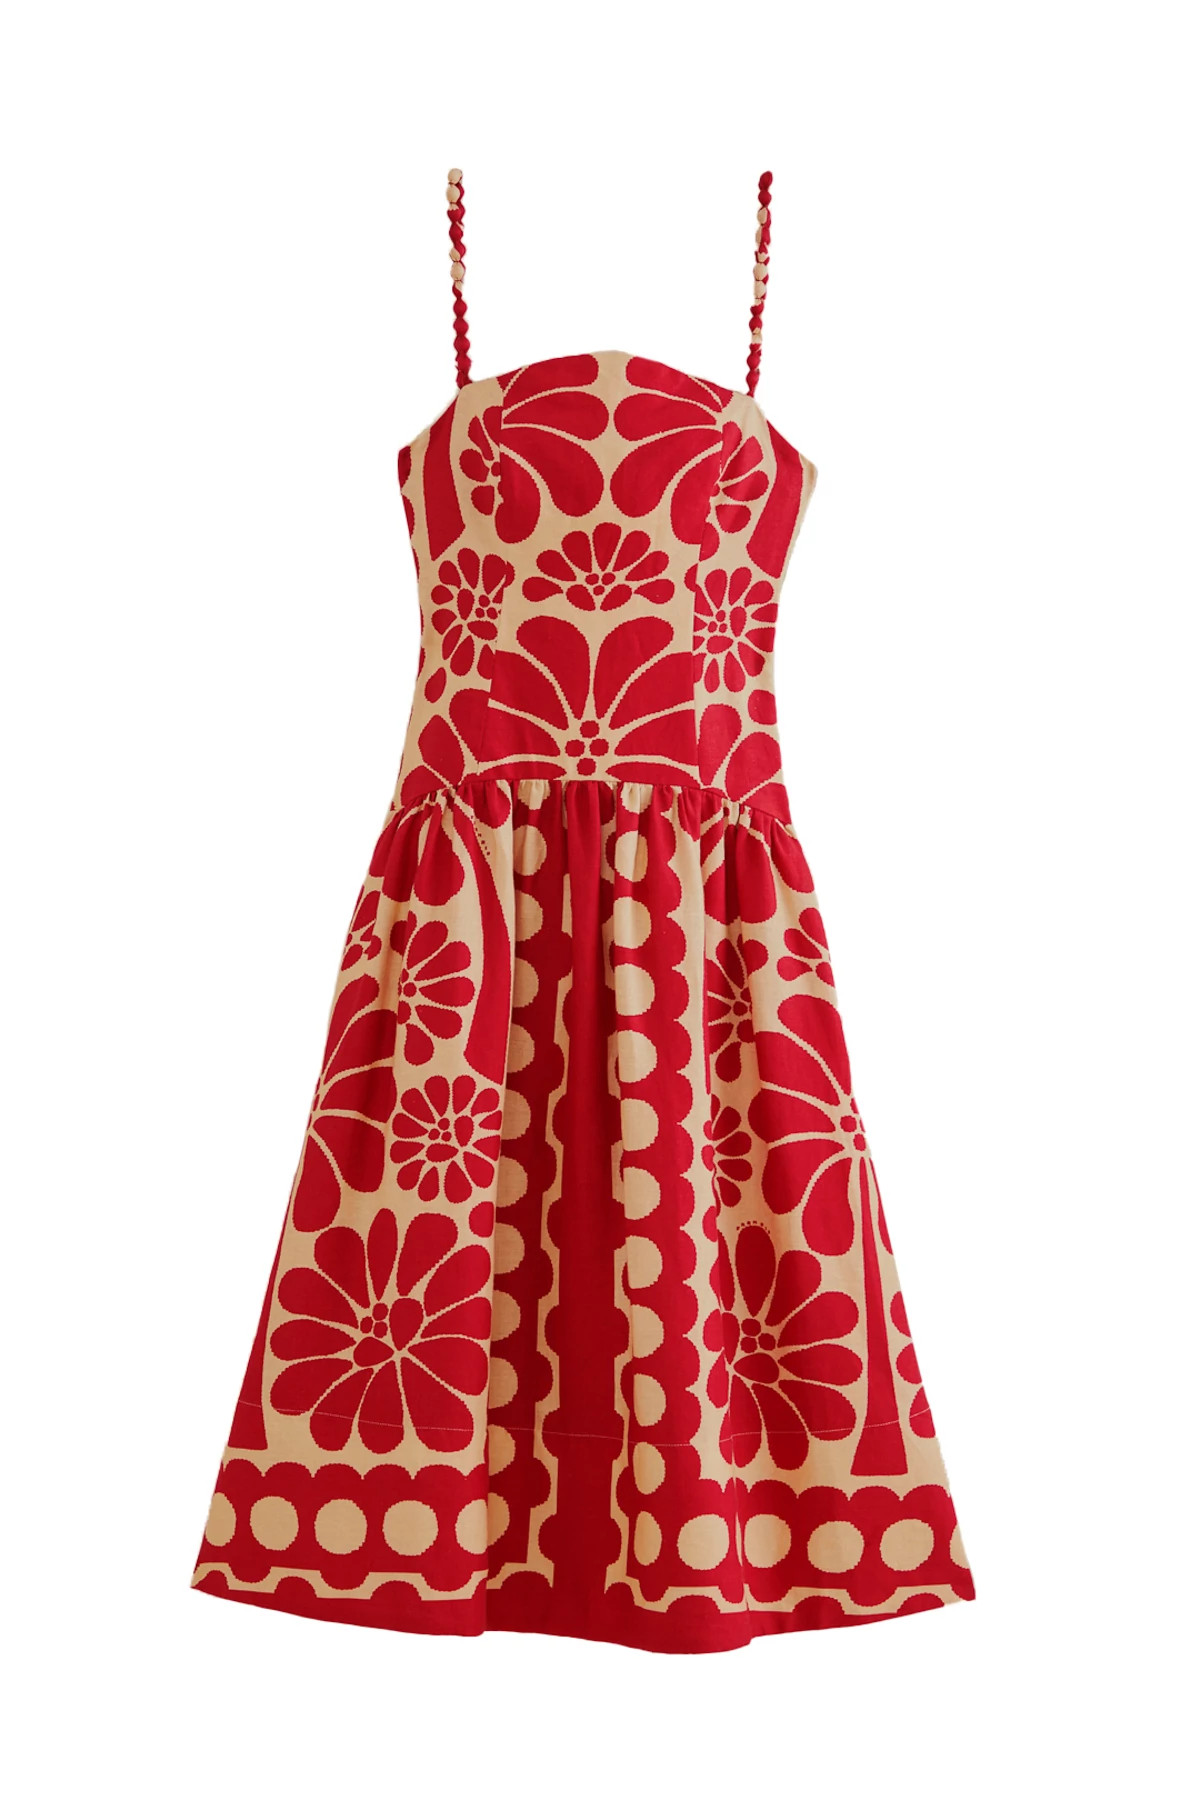 PALERMO RED Palermo Red Midi Dress image number 4